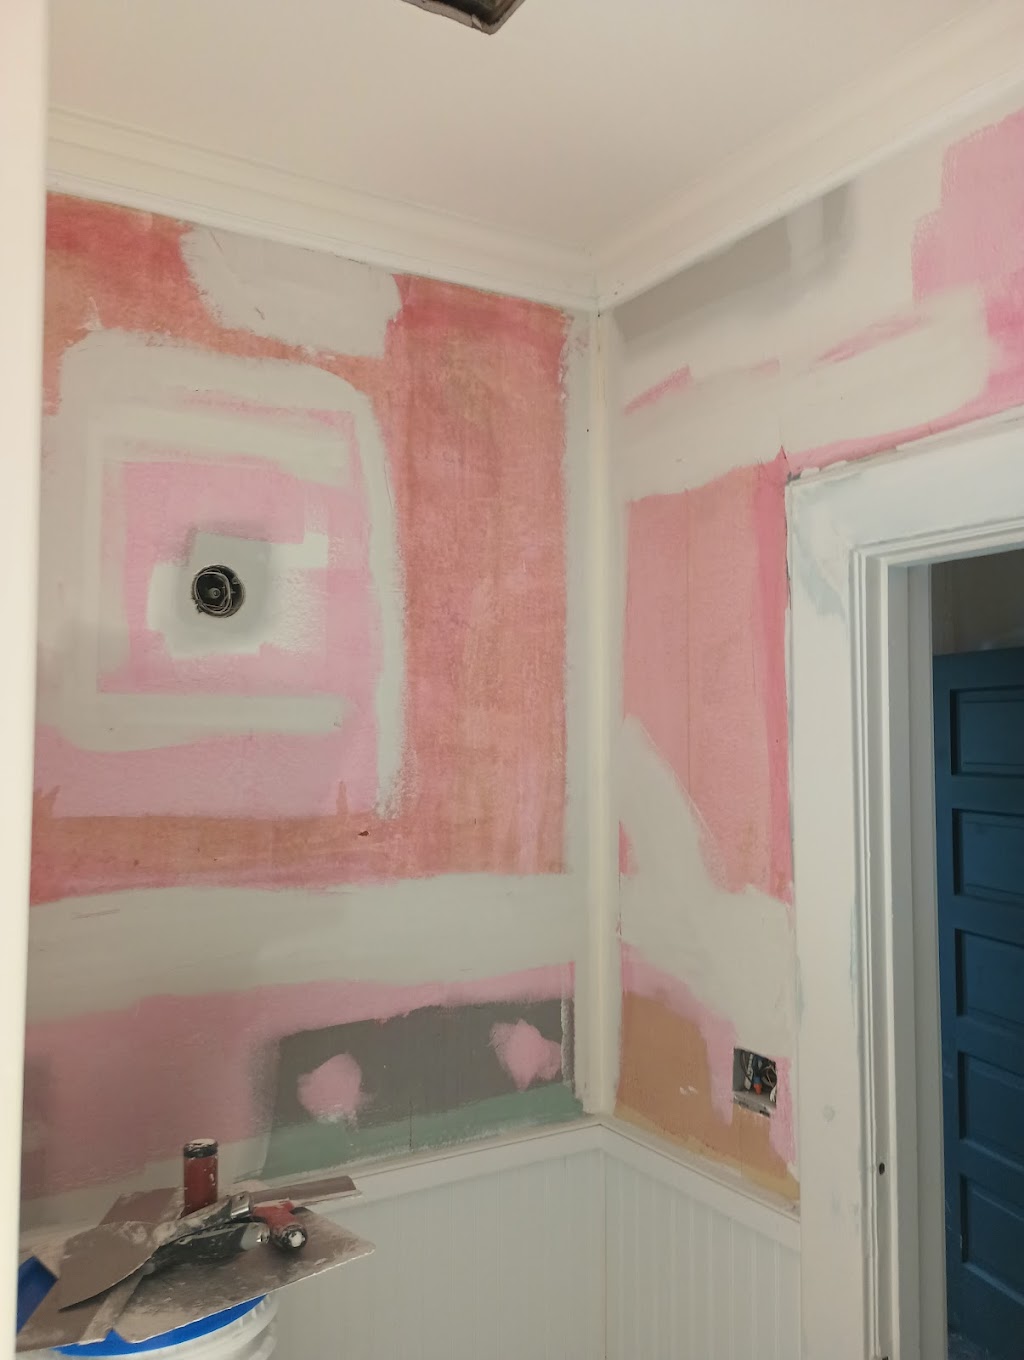 Denron Paint and Spackle LLC | 1145 Northville Turnpike, Riverhead, NY 11901 | Phone: (347) 472-8492